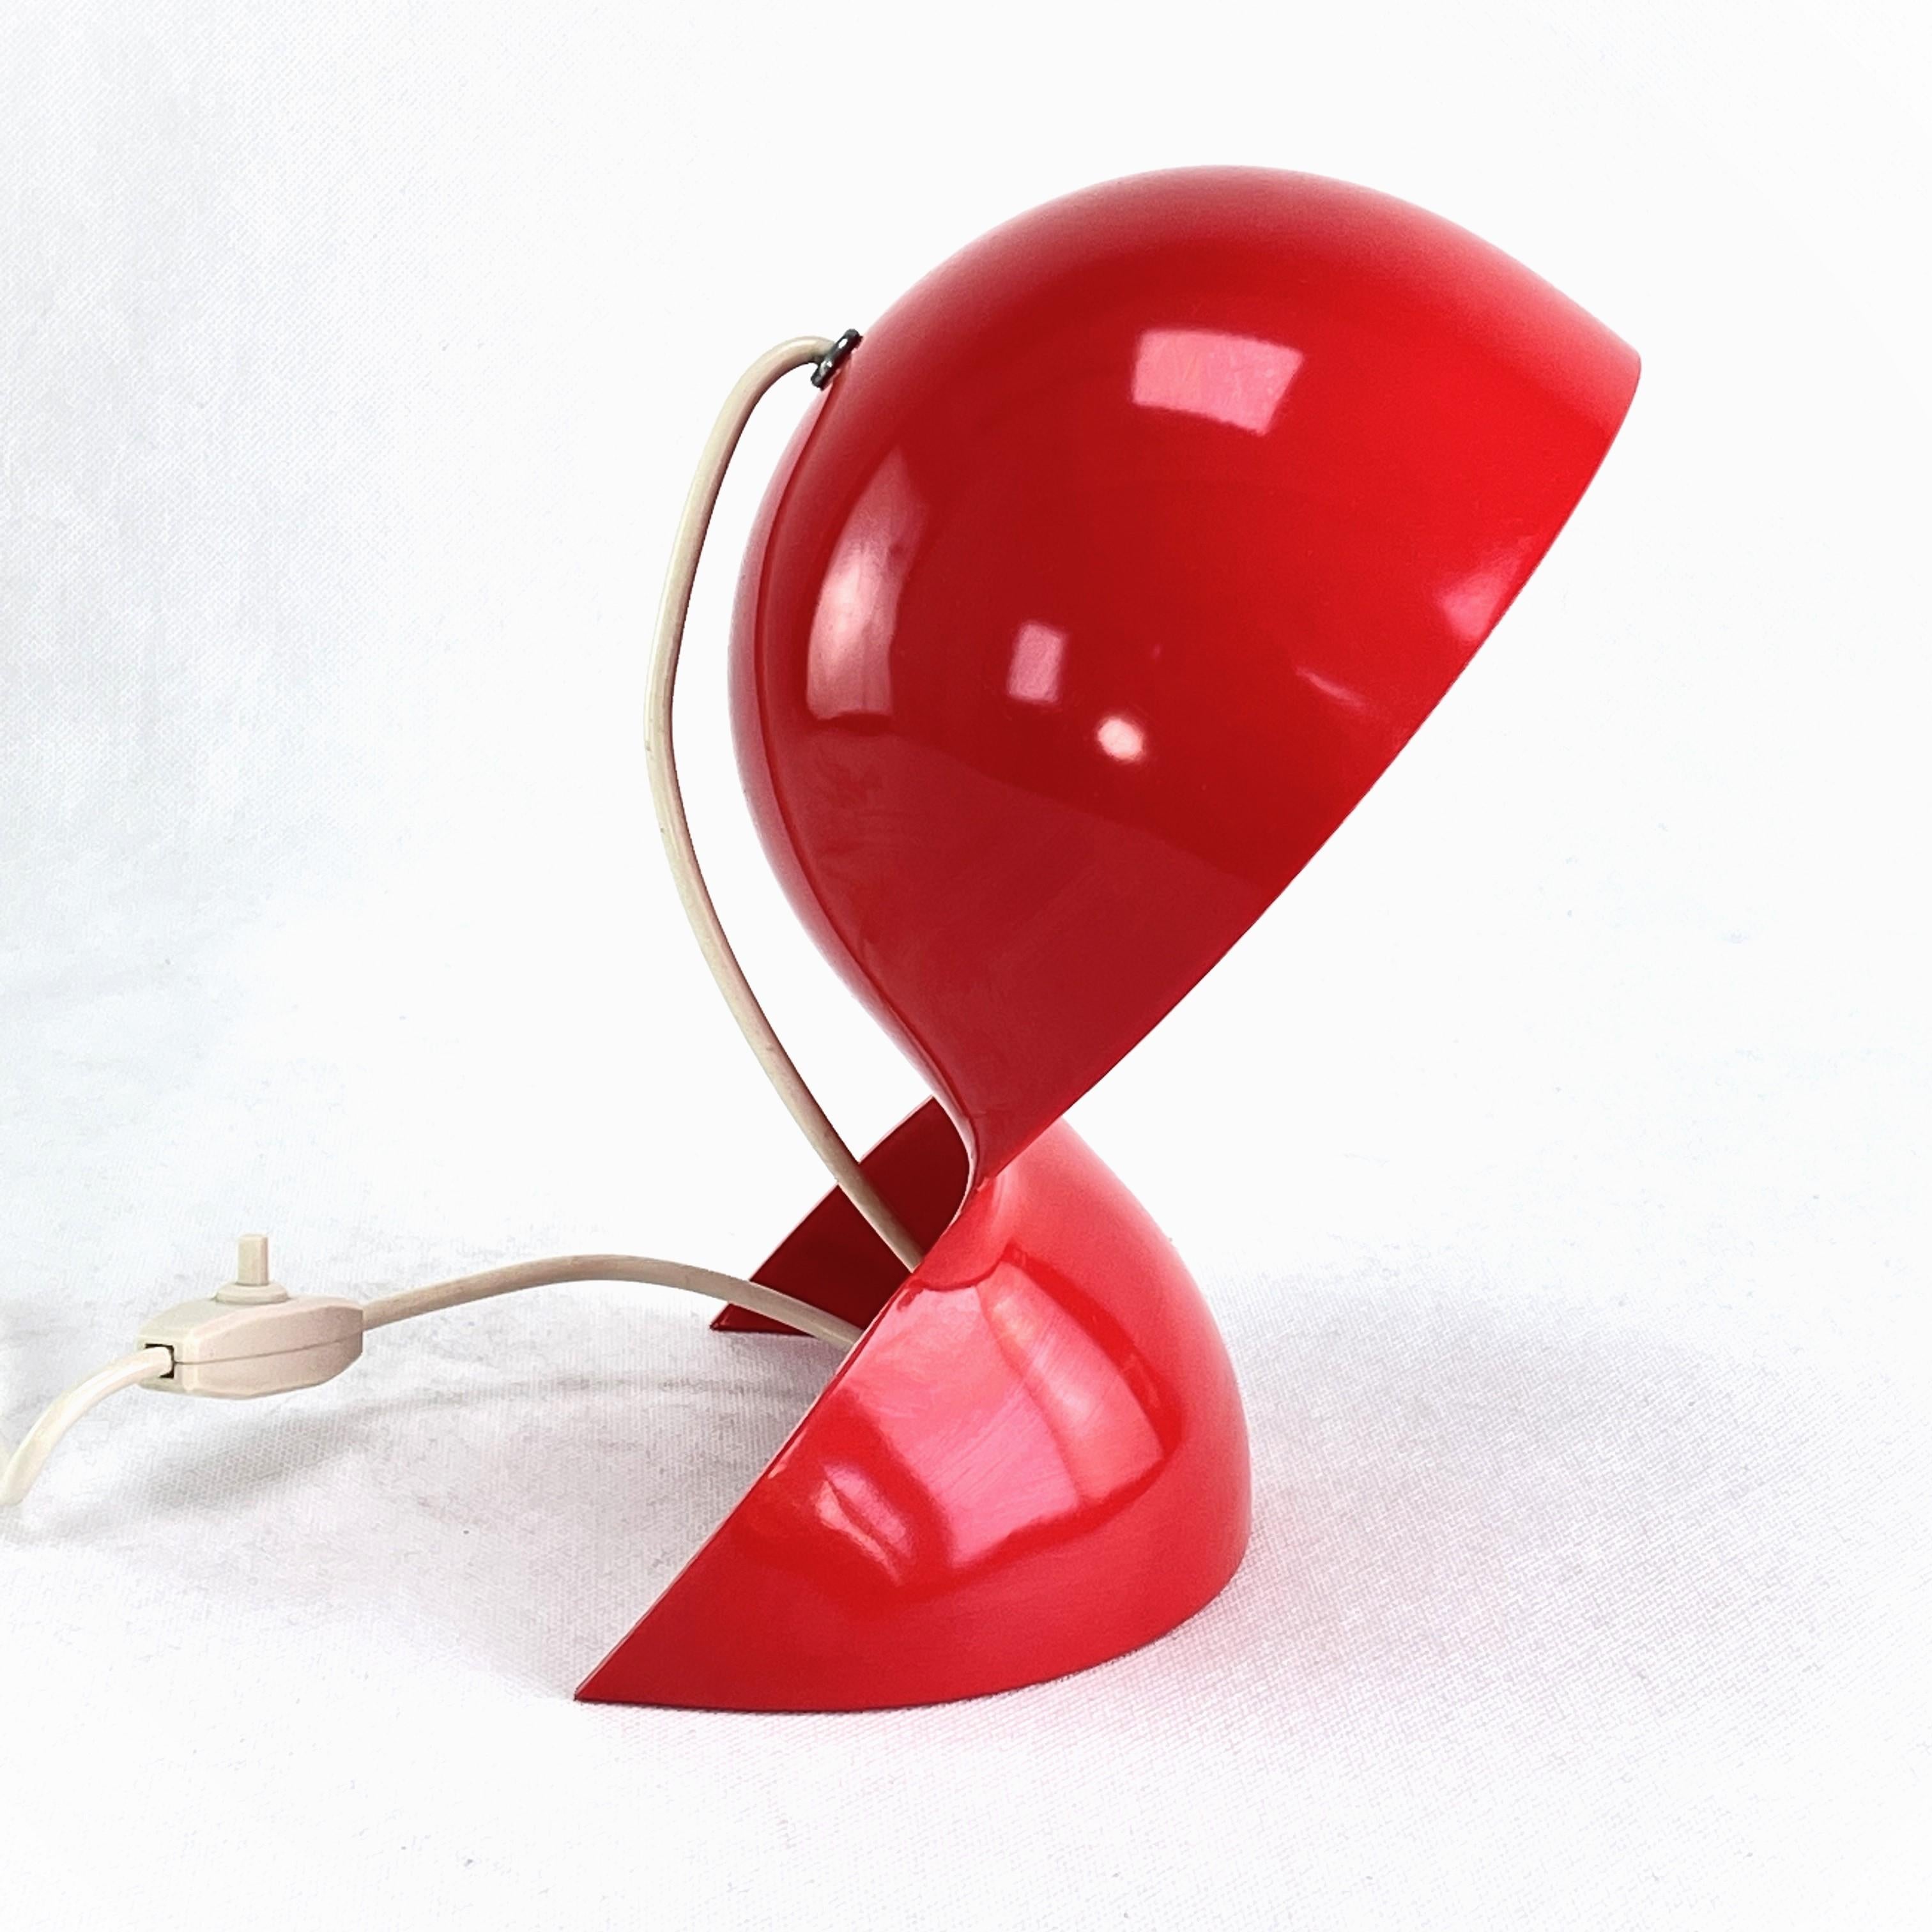 Red Table Lamp from Artemide by Vico Magistretti - 1960s.
The rare lamp is a real design Classic from the 60s. The vintage table lamp is an original from the time.
The 